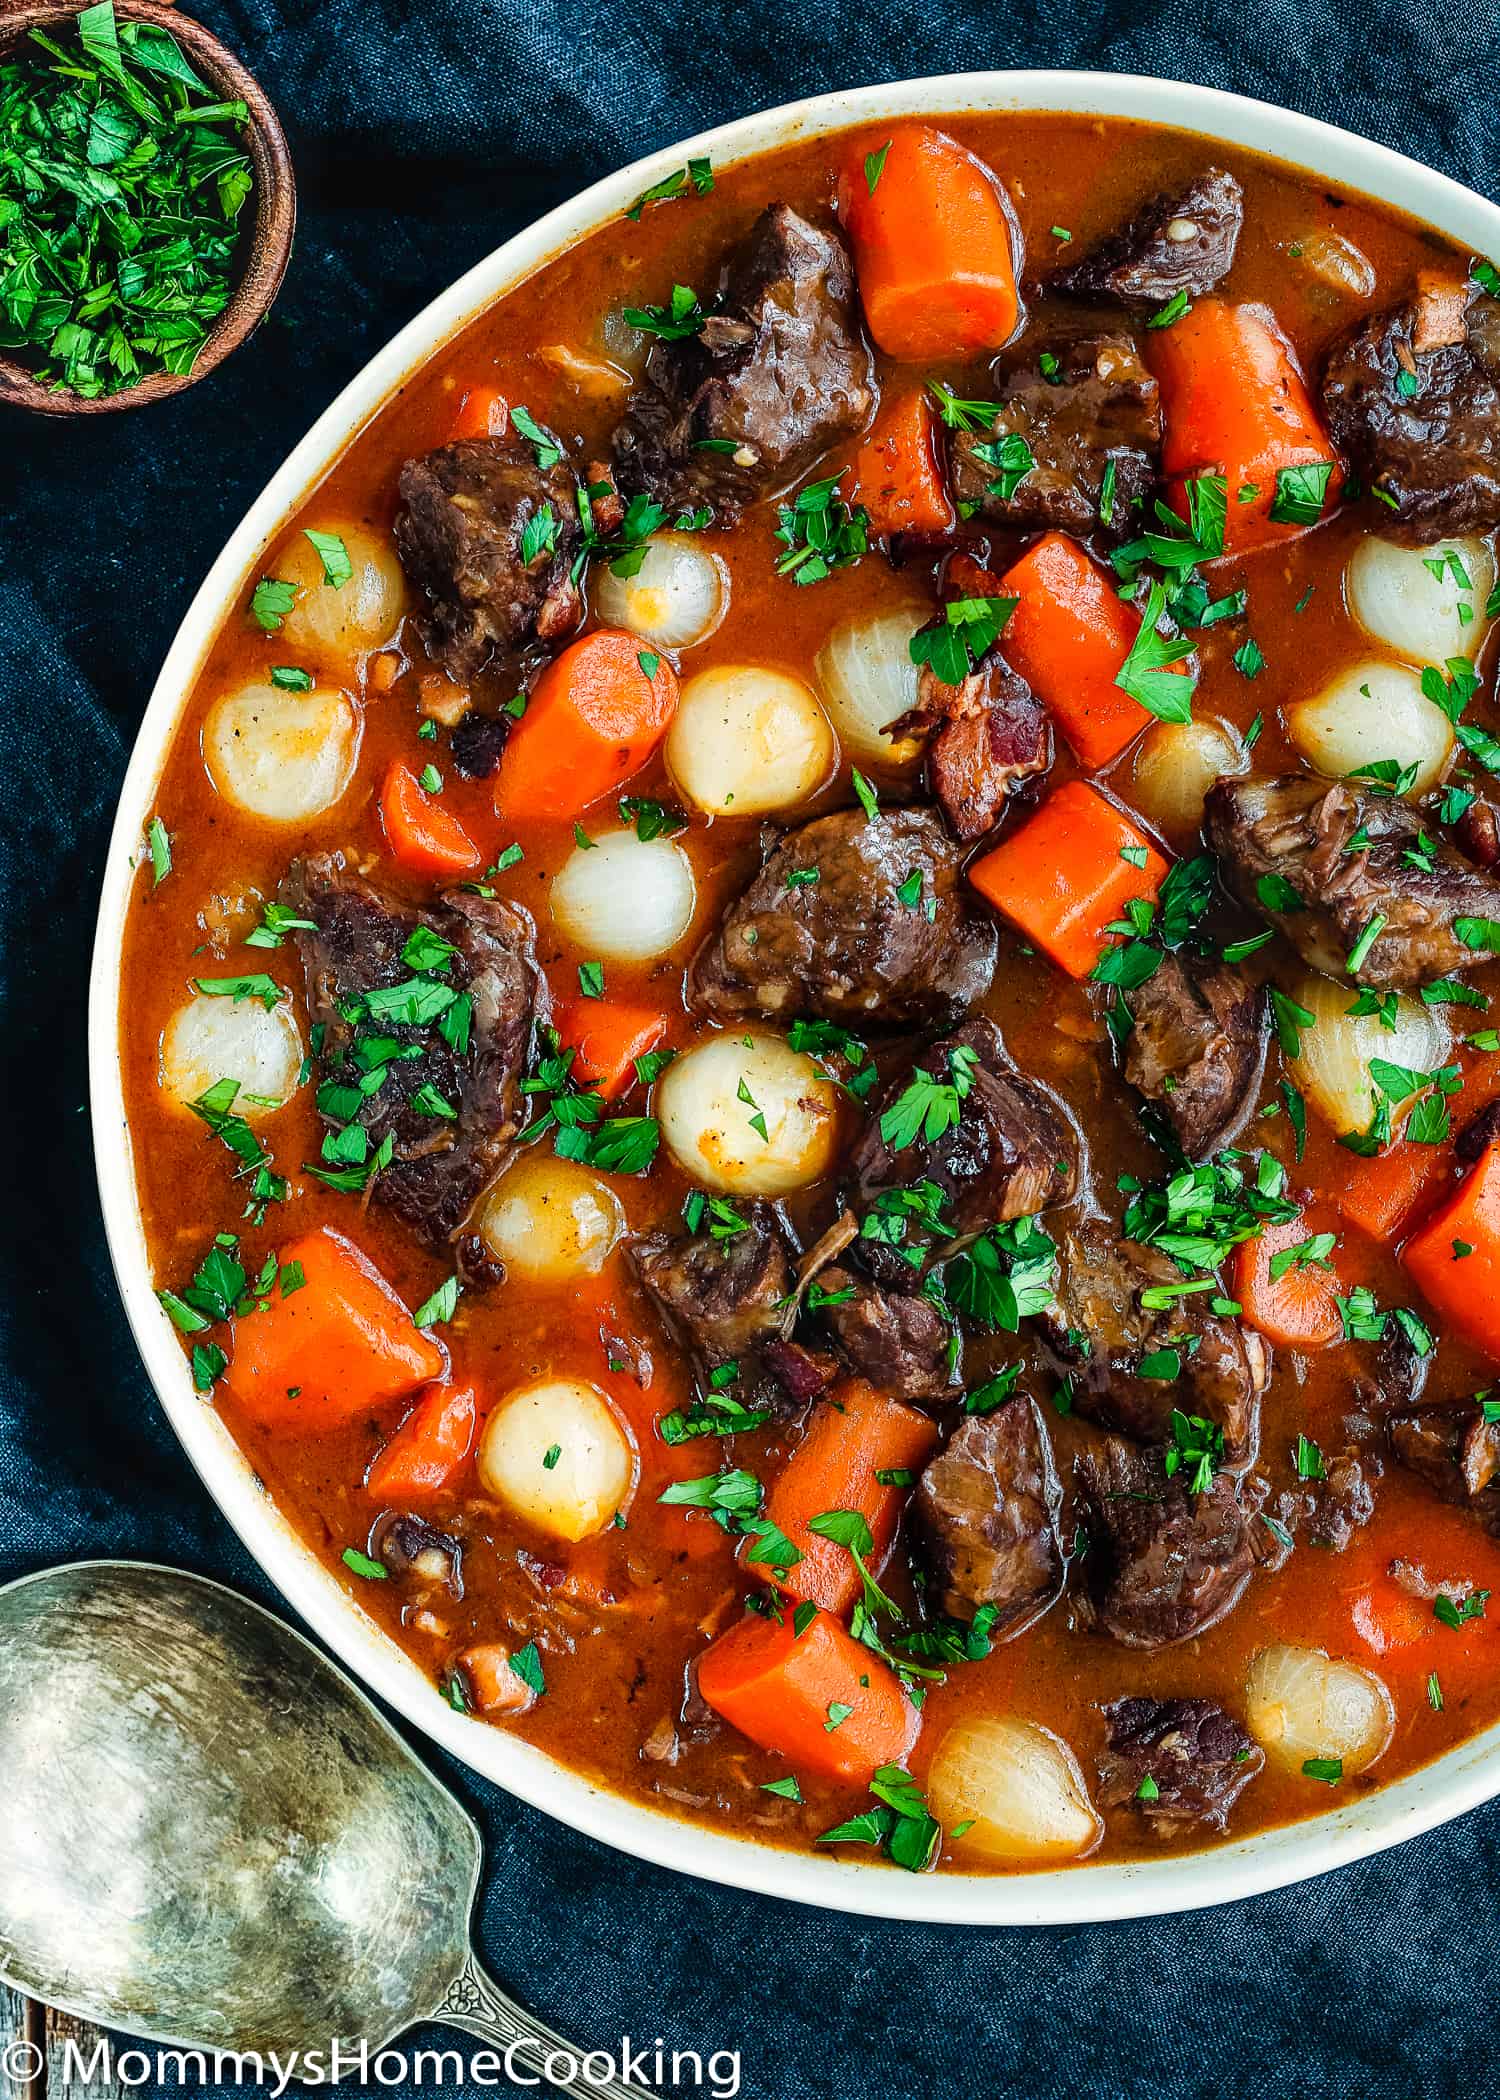 This Easy Instant Pot Beef Bourguignon Recipe has never been faster, easier, and yummier. This supremely delicious melt-in-your-mouth comfort dish is easy enough for a simple weeknight dinner and elegant enough for entertaining. https://mommyshomecooking.com